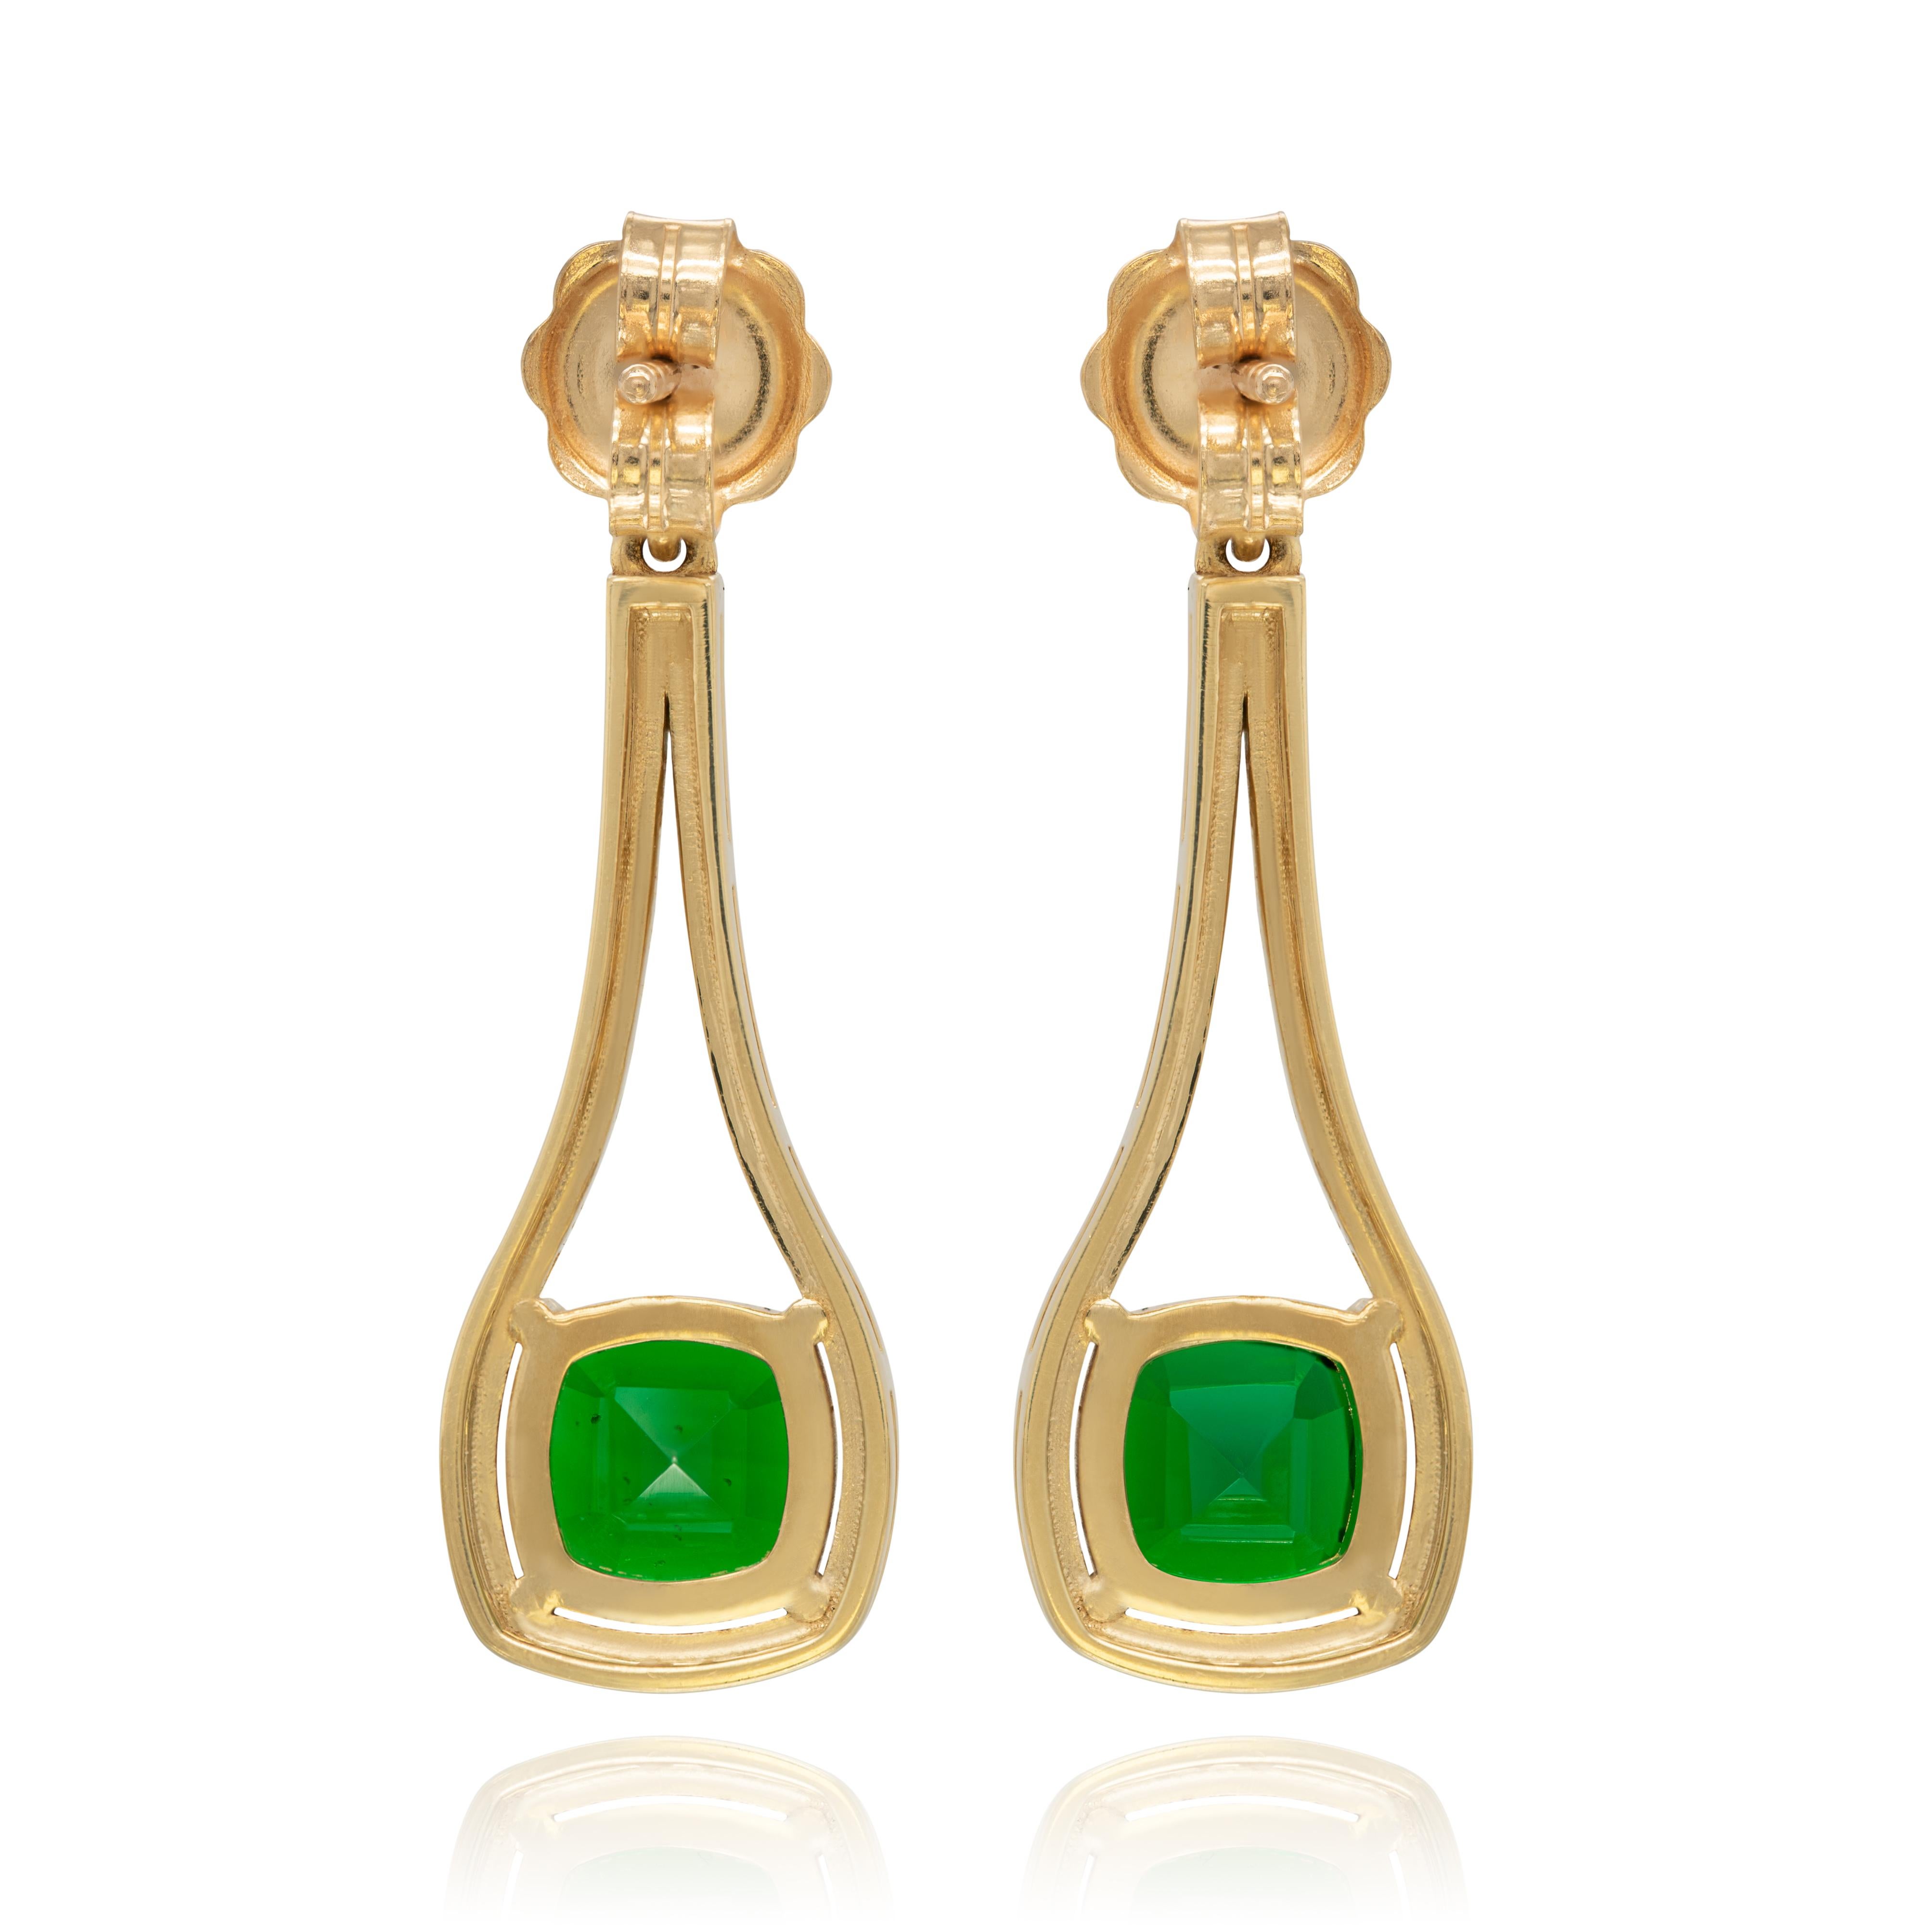 Women's Natural Tourmalines 4.57 Carats set in 18K Yellow Gold Earrings with Diamonds